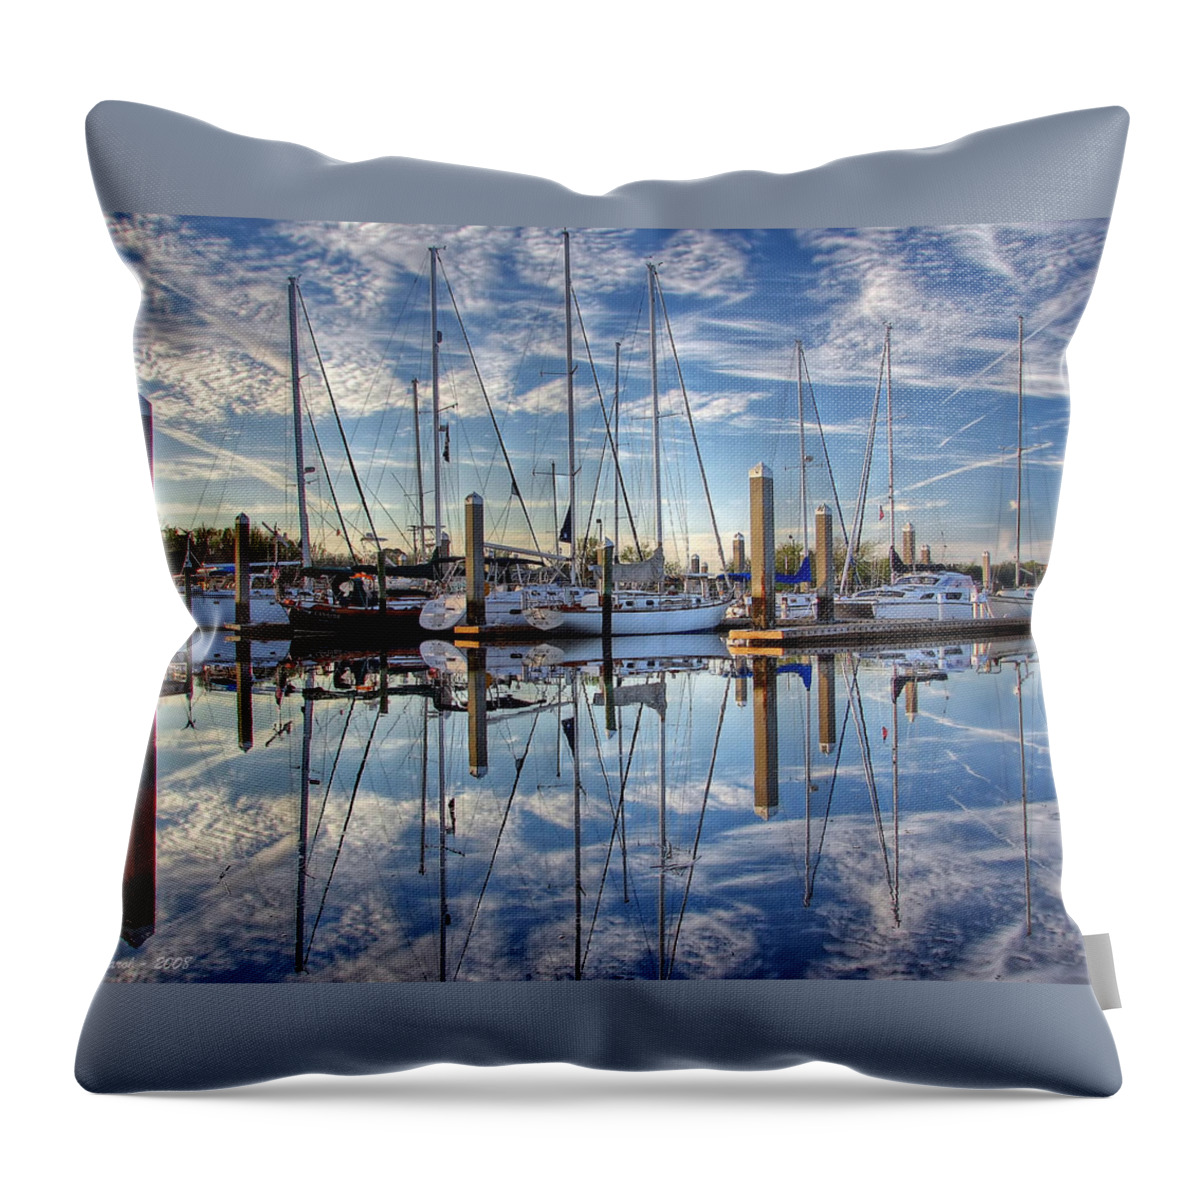 Marina Throw Pillow featuring the photograph Marina Morning Reflections by Farol Tomson